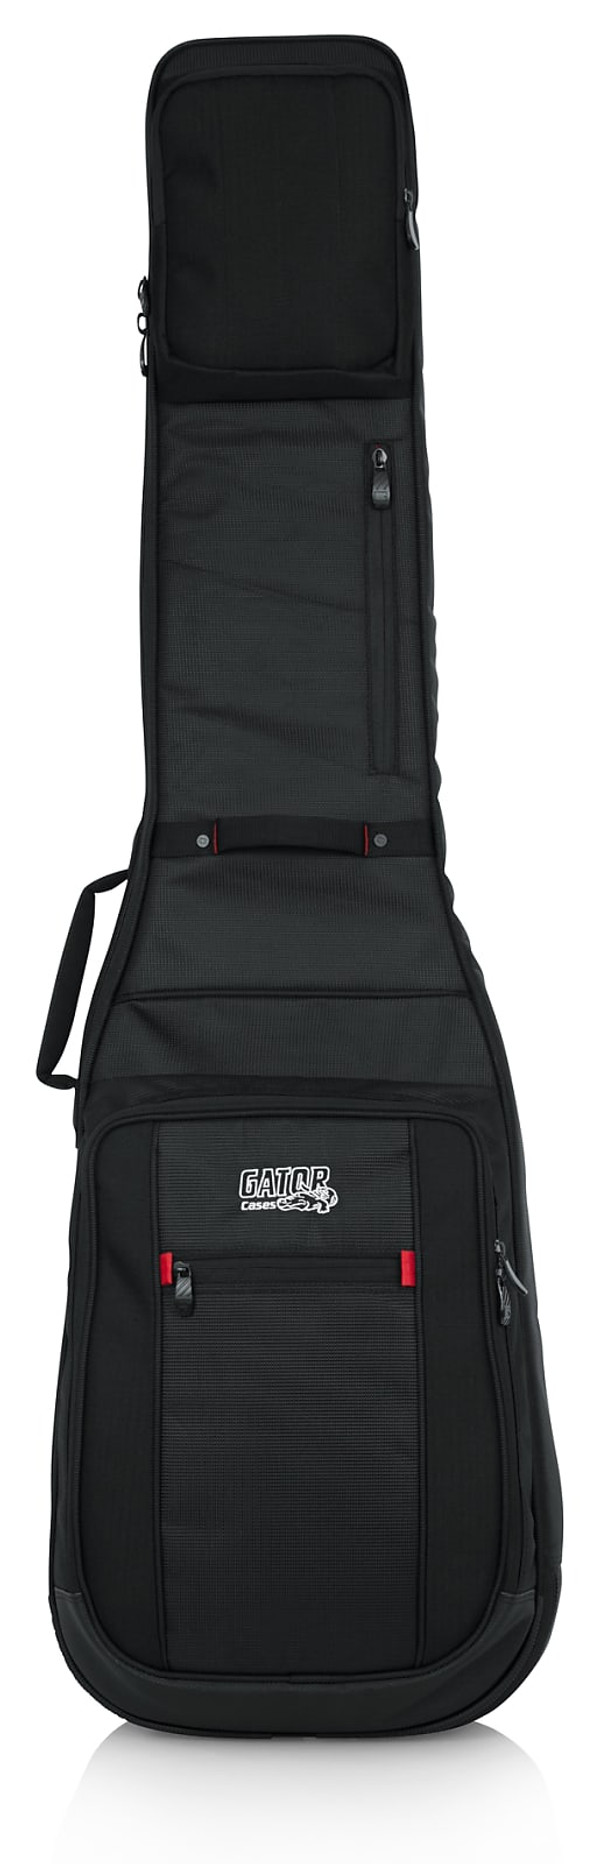 Gator Pro-Go Series Bass Guitar Bag with Micro Fleece Interior and Removable Backpack Straps